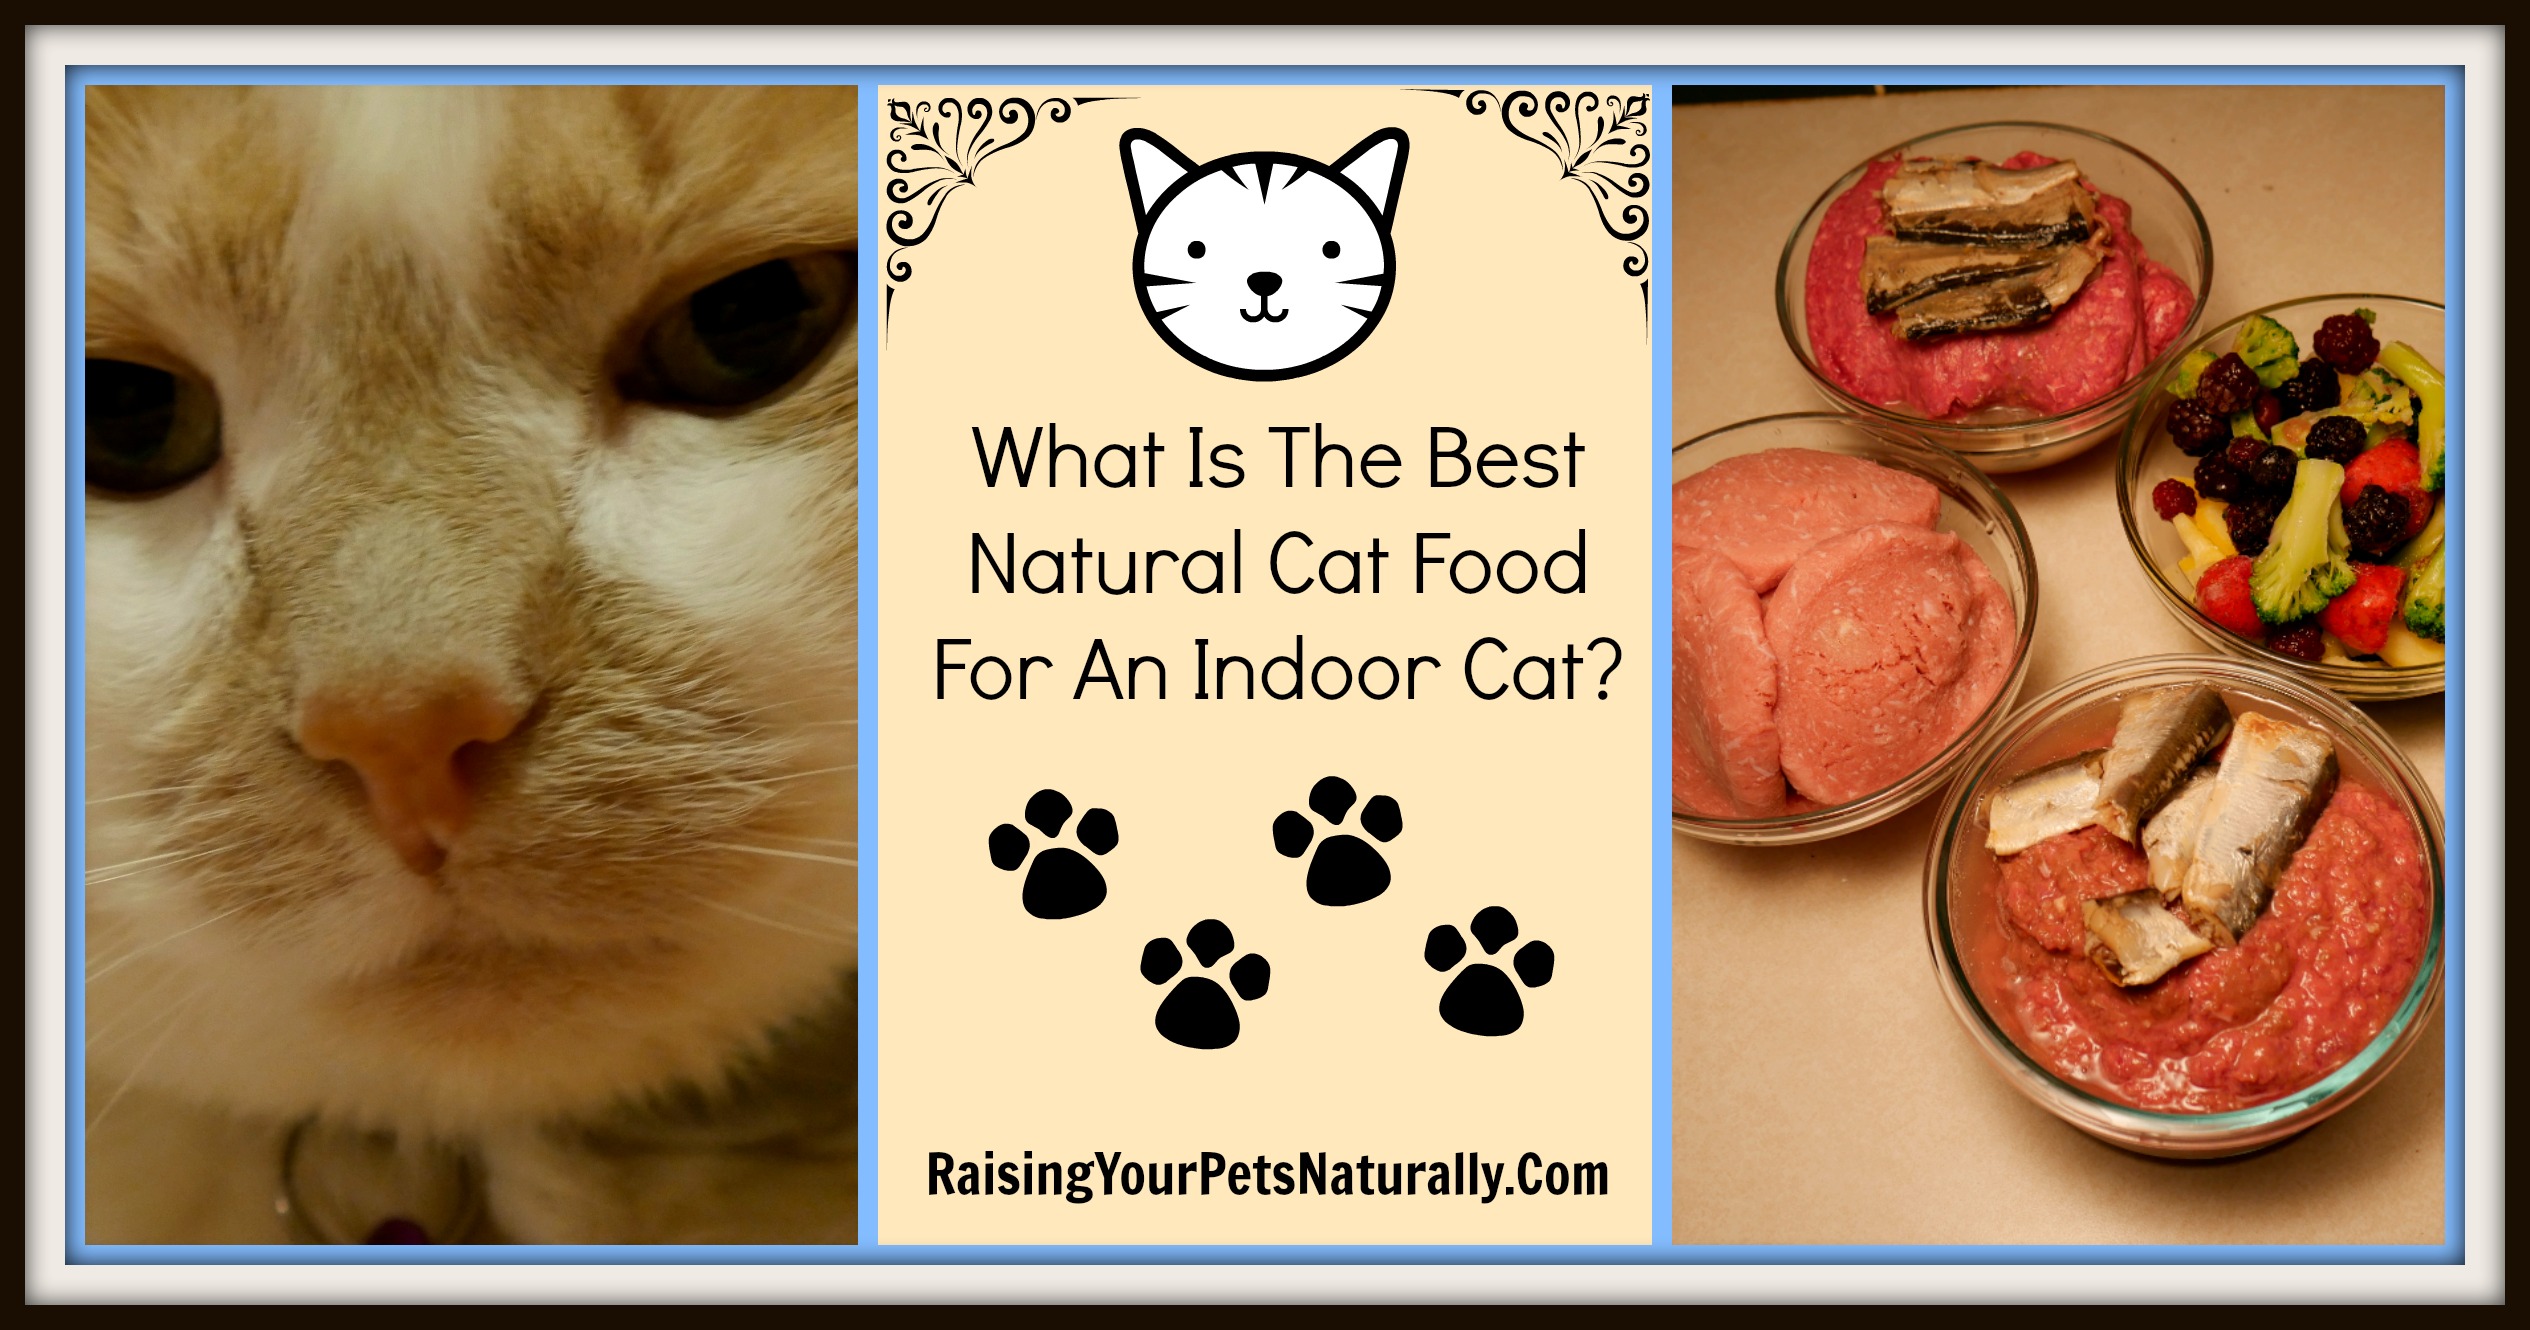 What's the best grain-free dry cat food brand? There isn't one. Dry cat food is by nature, well, dry. Cats, dogs, people… we all need a lot of moisture in our diets. Learn more. #raisingyourpetsnaturally